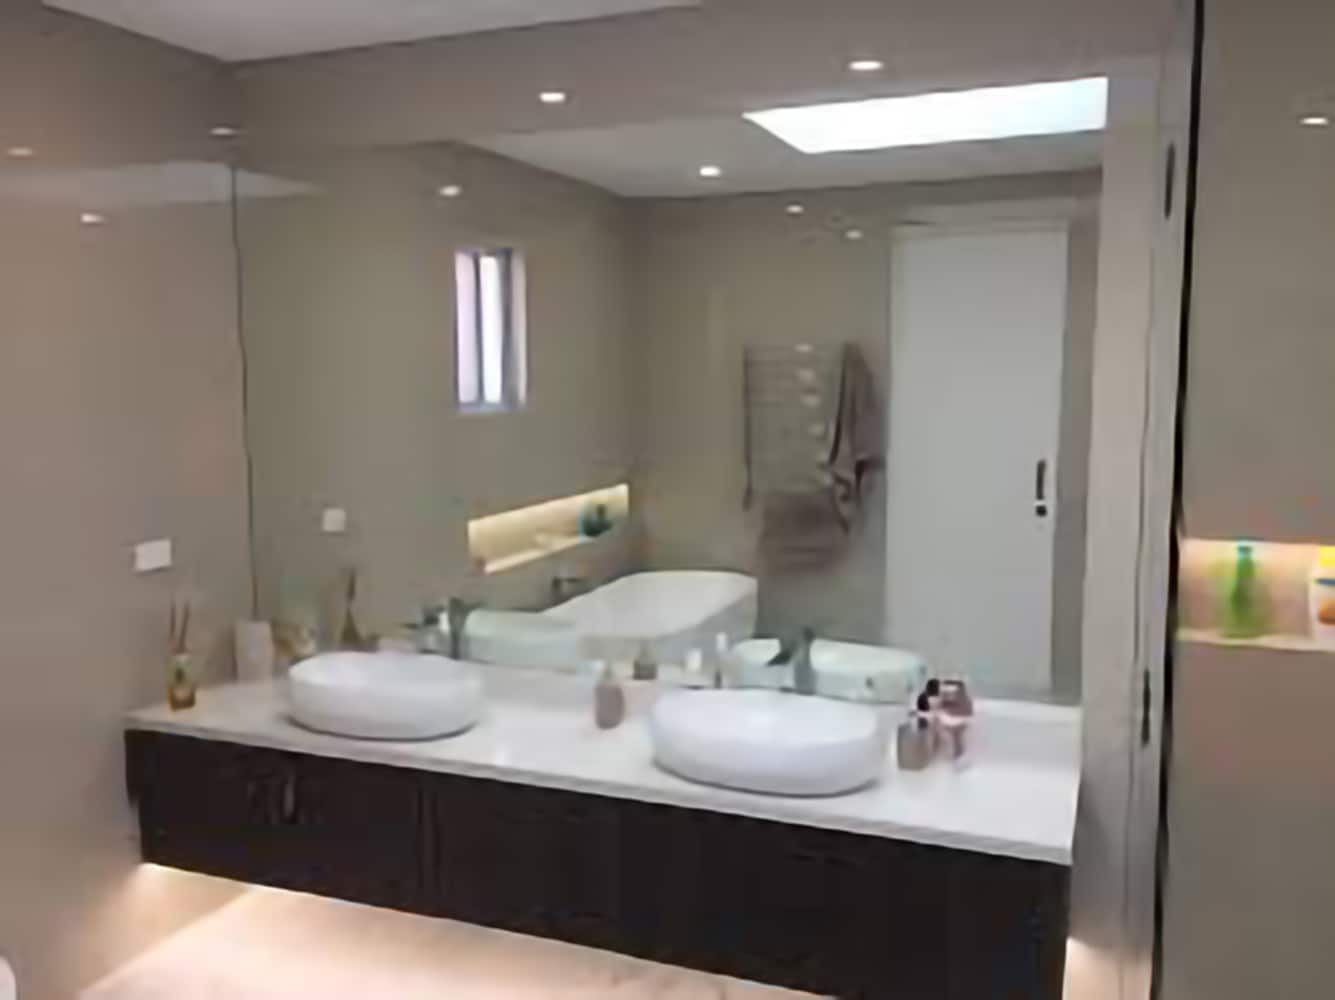 Wholesale Commercial Framed Bathroom Mirror Suppliers For Interior  Designers Builders Architects